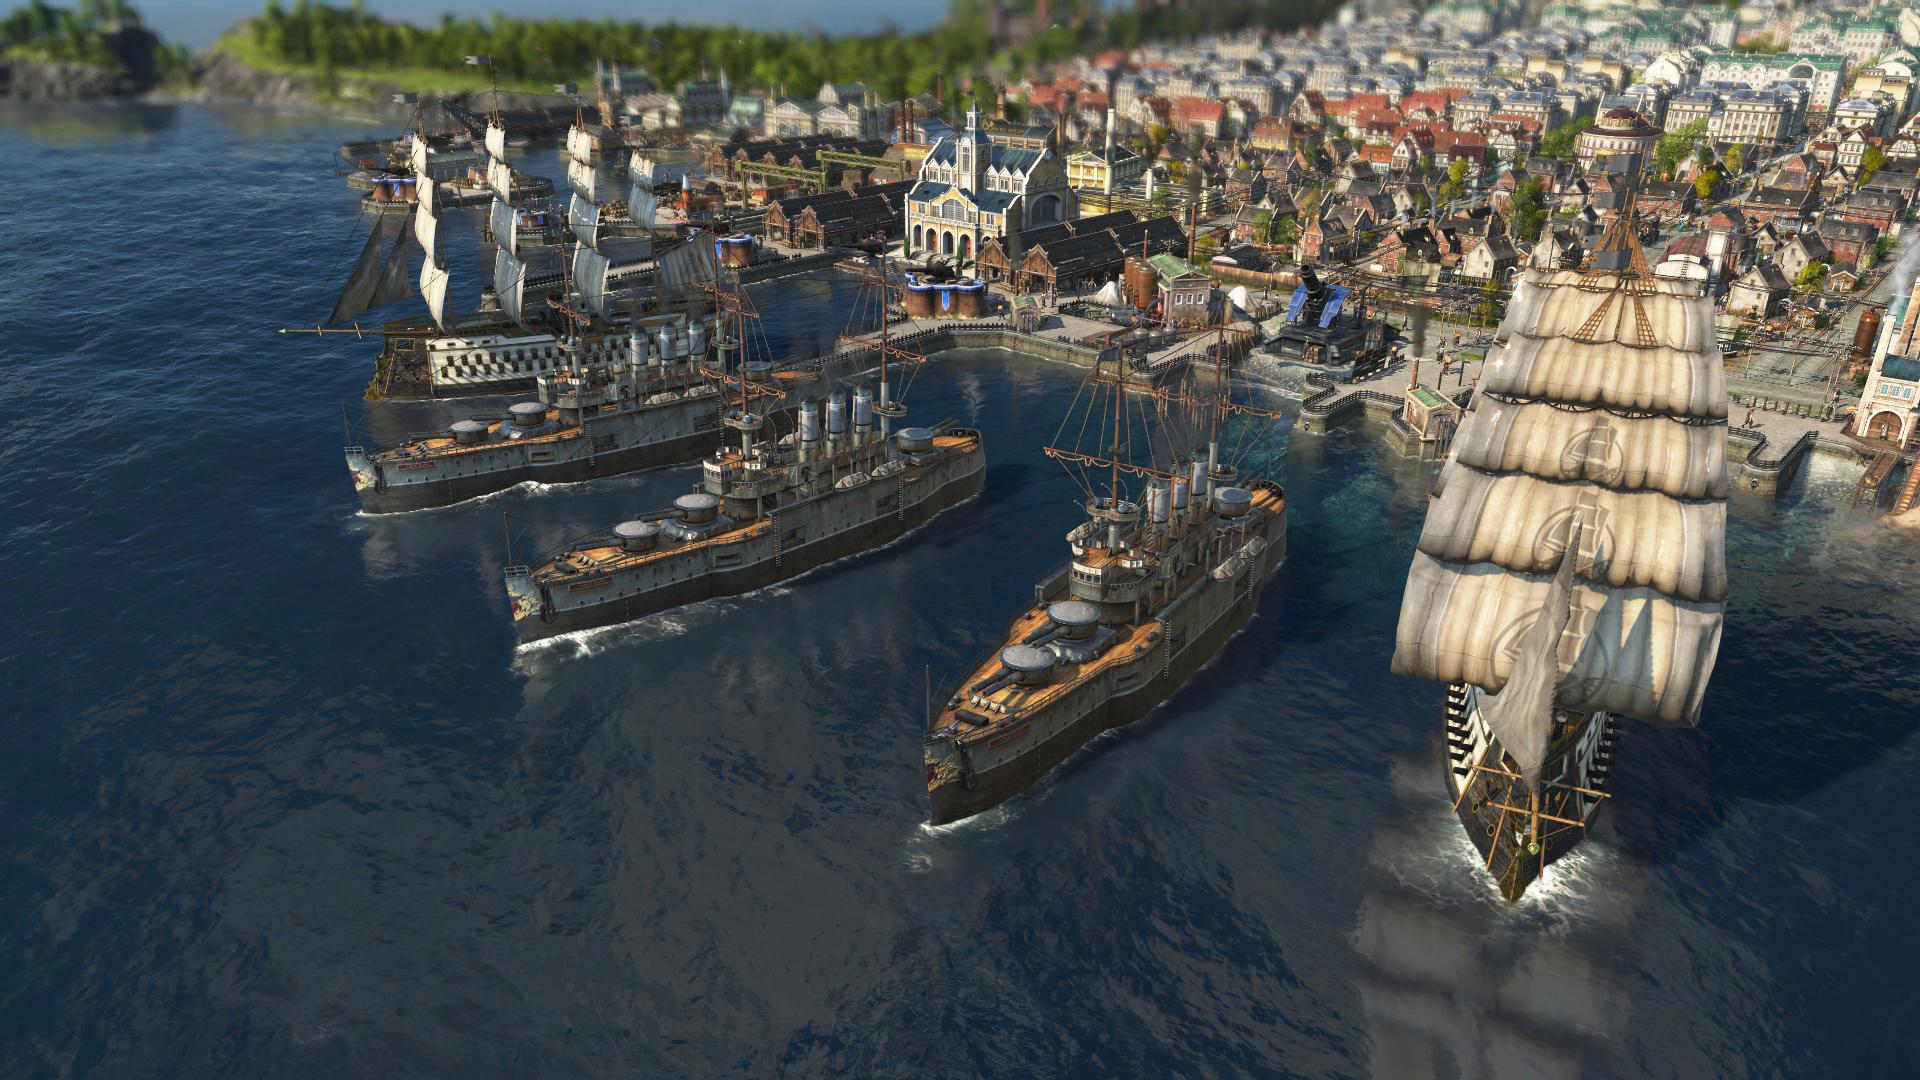 anno 1800 not on steam